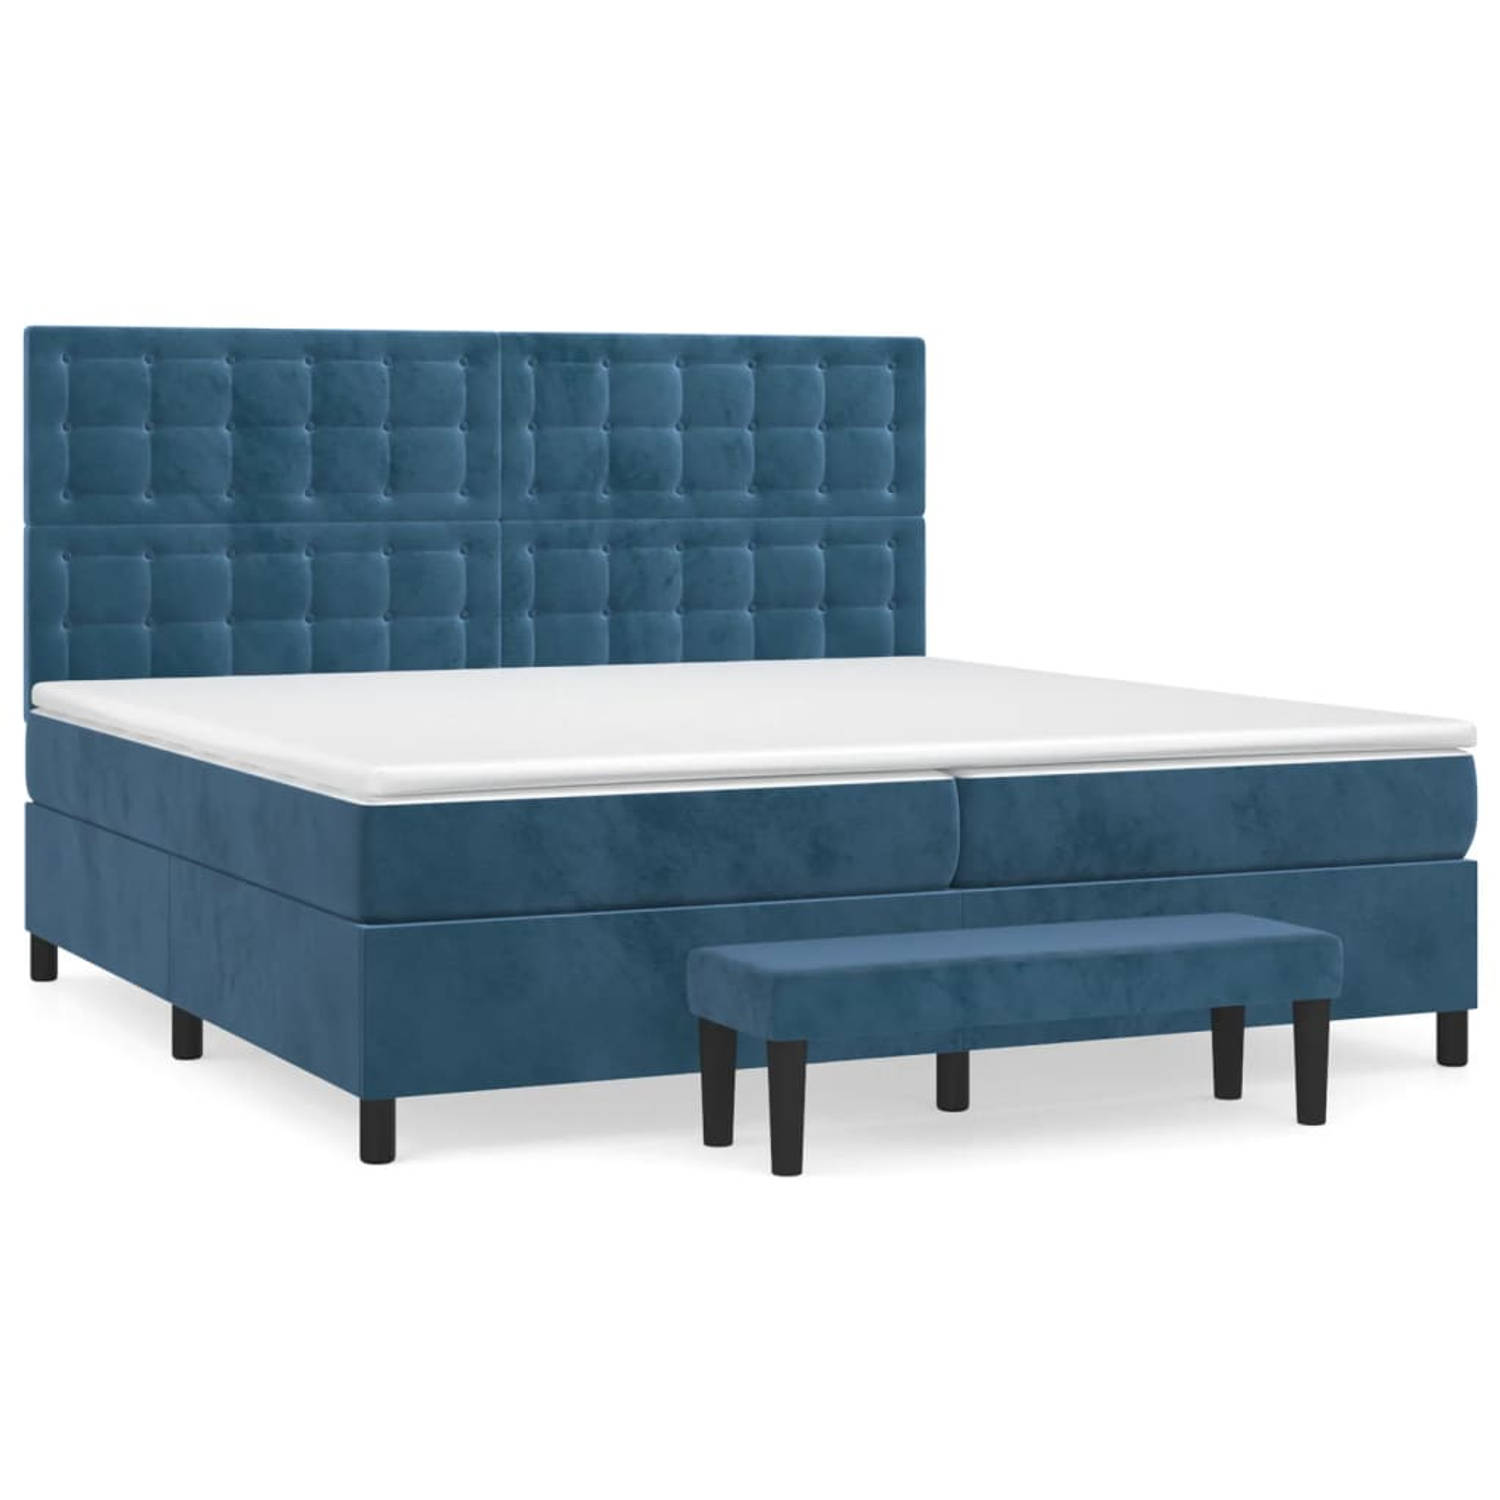 The Living Store Boxspringbed Donkerblauw 203x200x118/128 cm - Zacht fluweel